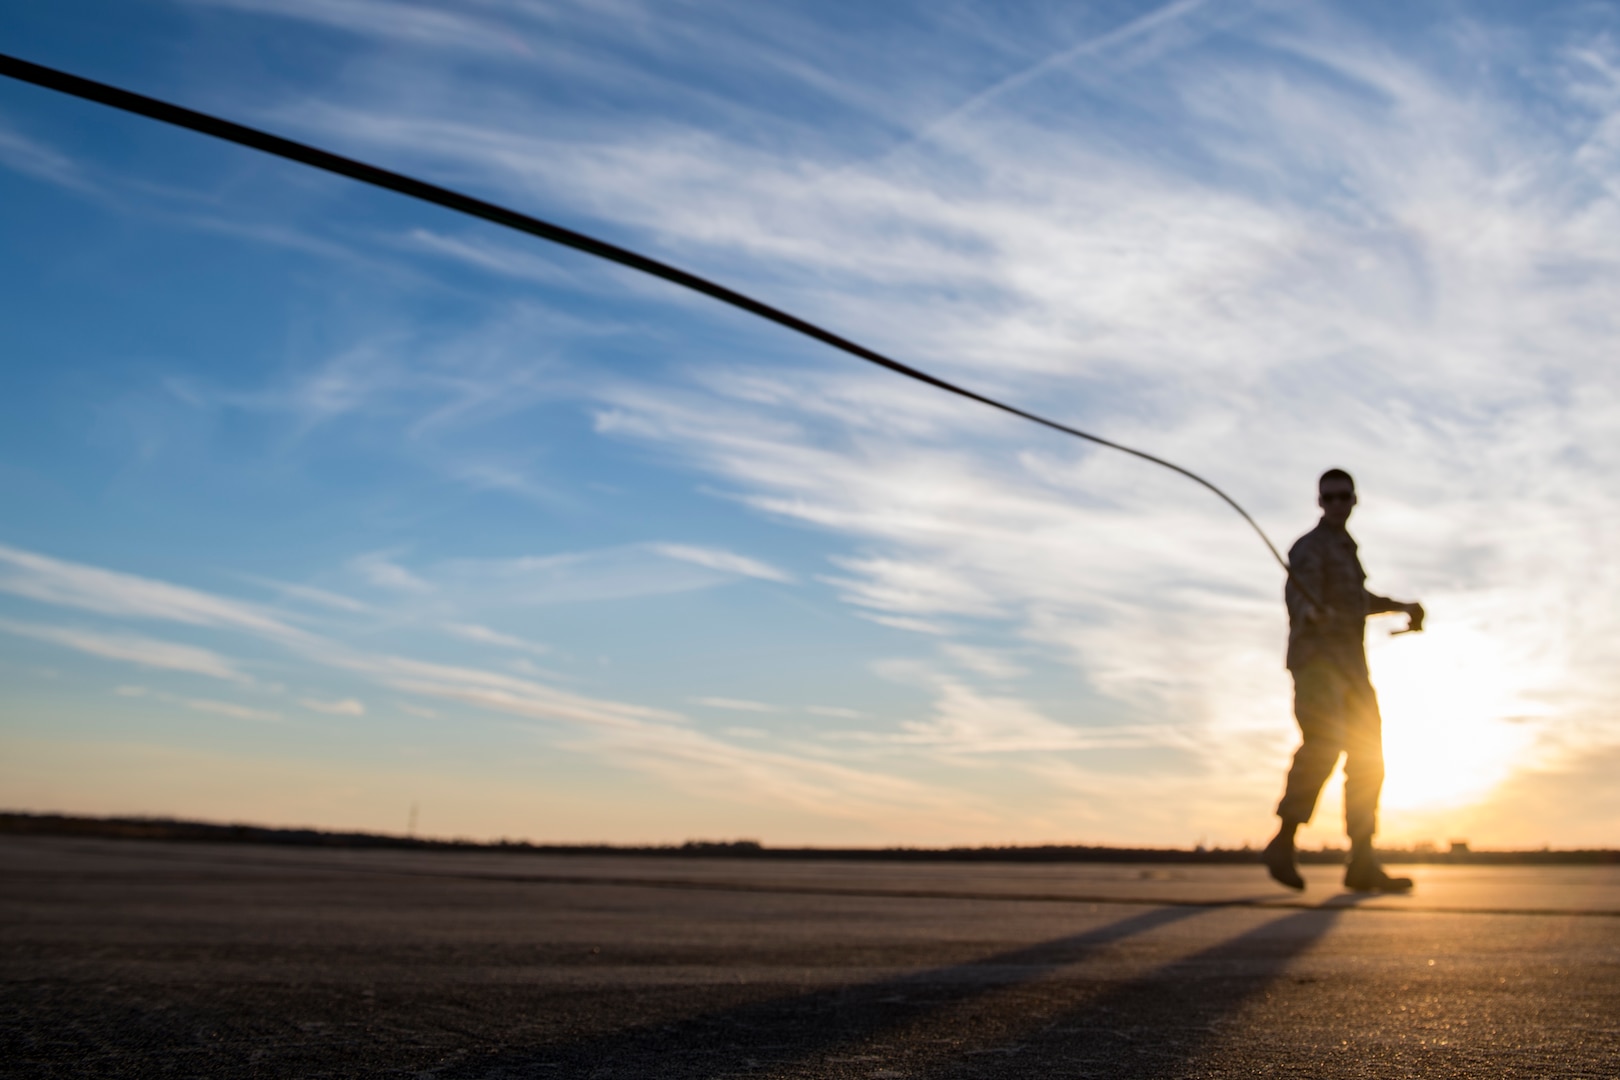 Airman 1st Class Evan Valance, 23d Logistics Readiness Squadron fuels distribution operator, drags a trigger hose away from a M-11 refueling truck to conduct HH-60G Pave Hawk hot-pit refueling operations, Jan. 16, 2018 at Moody Air Force Base, Ga. Airmen who work in the petroleum, oils and lubricants (POL) flight frequently use hot pit refueling, which is a more efficient tactic that allows aircrews a quick transition from the flight line back to their current objective. (U.S. Air Force photo by Senior Airman Daniel Snider)